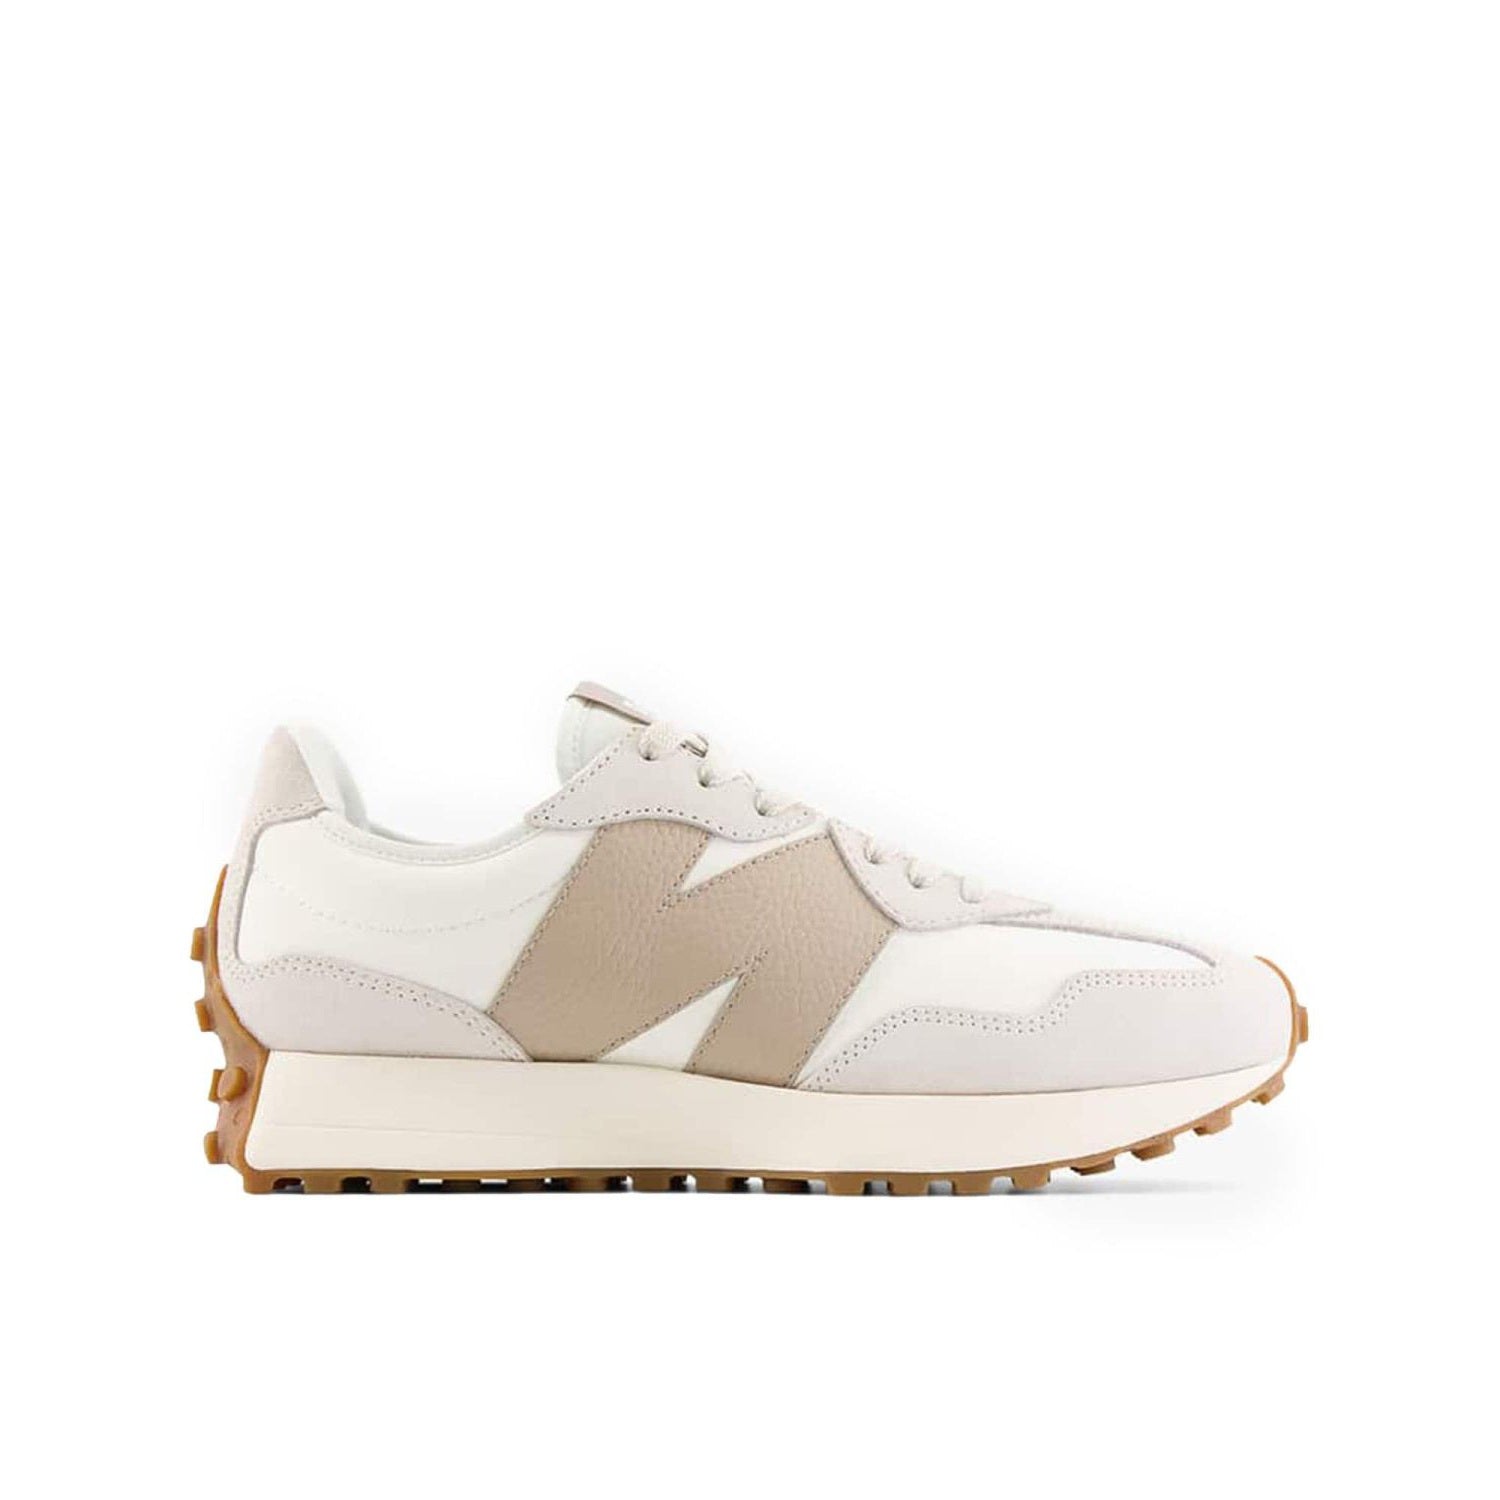 NEW BALANCE 327 UNISEX SNEAKERS SHOES - BEIGE